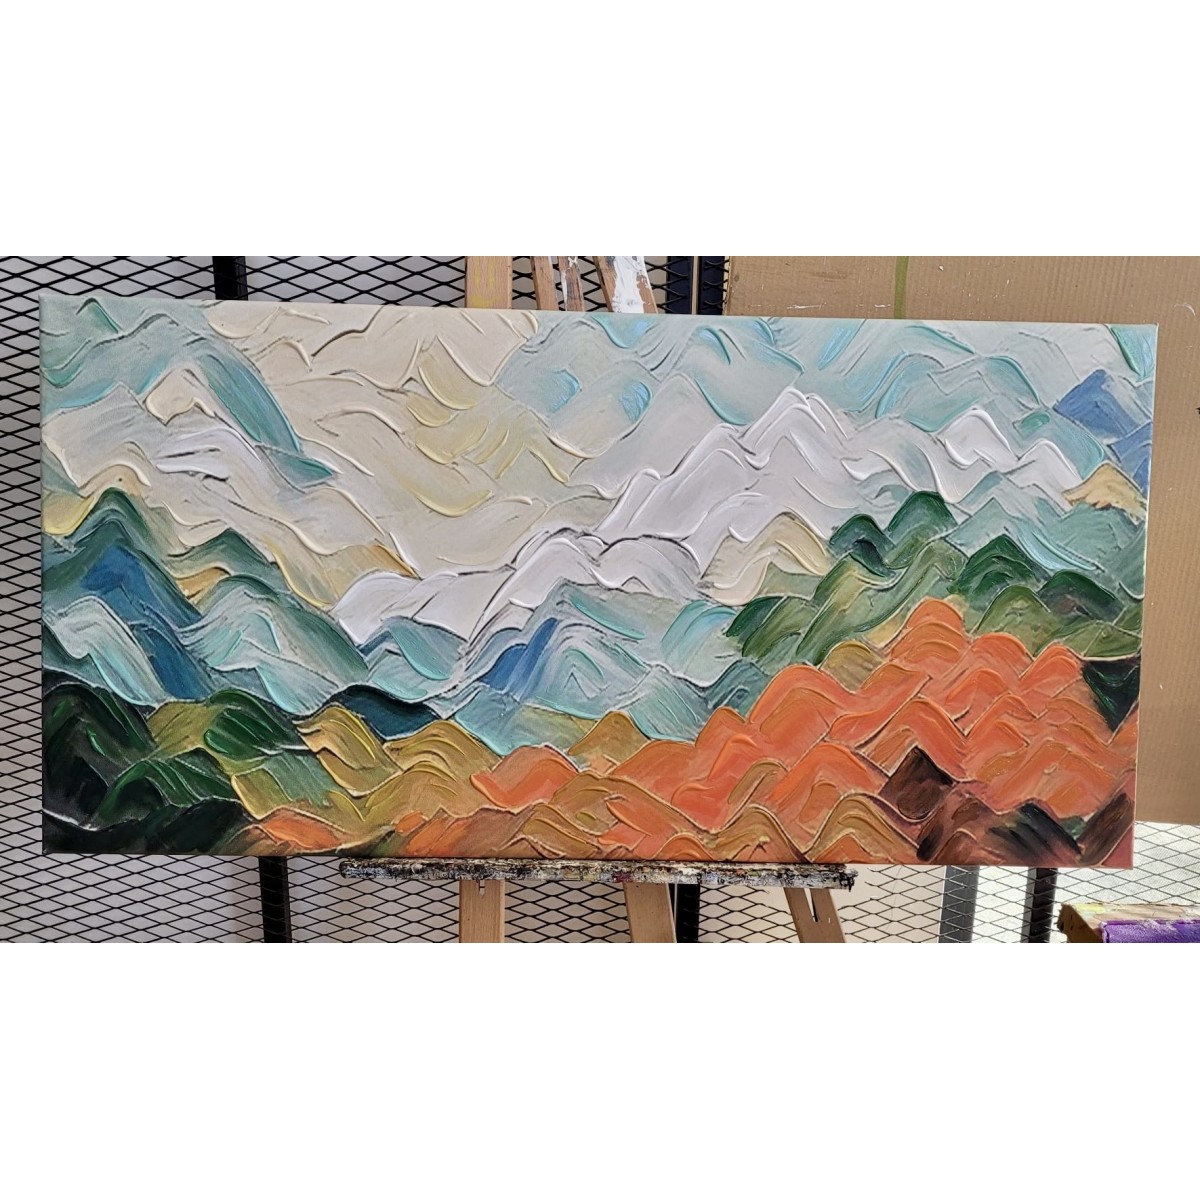 Orange Mountains 3D Heavy Textured Partial Oil Painting